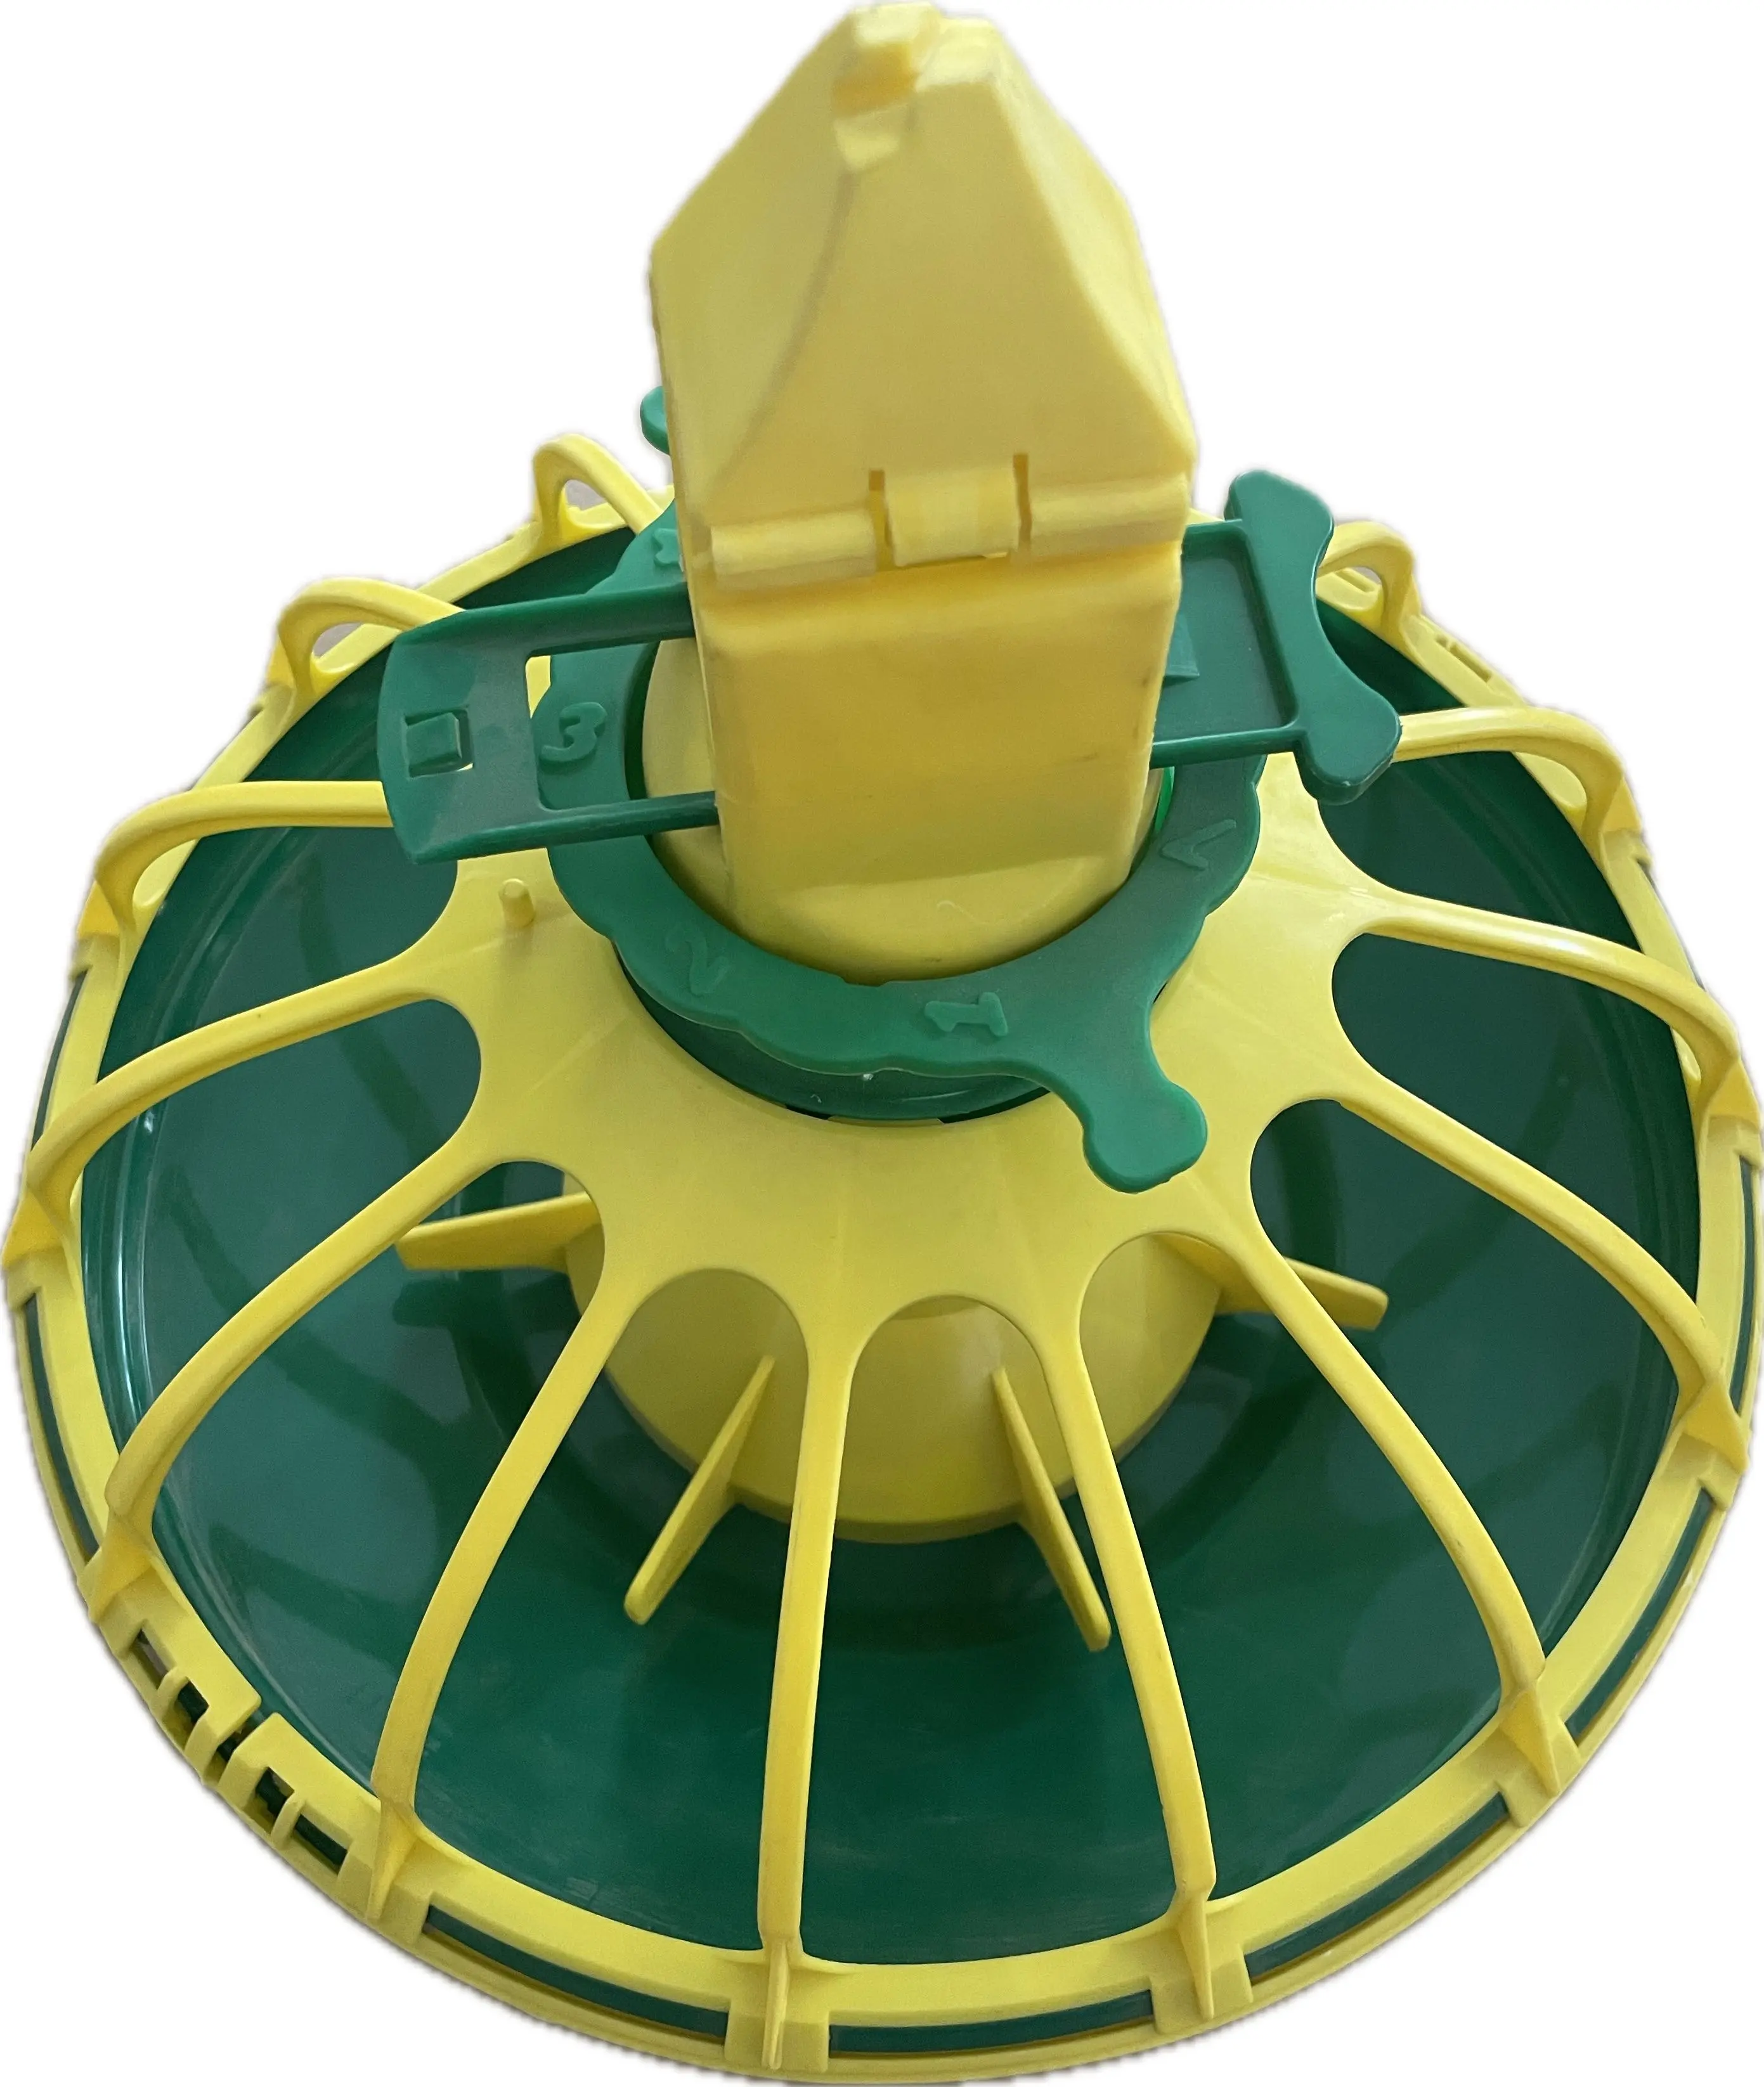 Automatic feed pan in poultry farm pan feeder hi quality pan feeder for chicken ,Duck,Goose,Broiler,Breeder green-yellow color